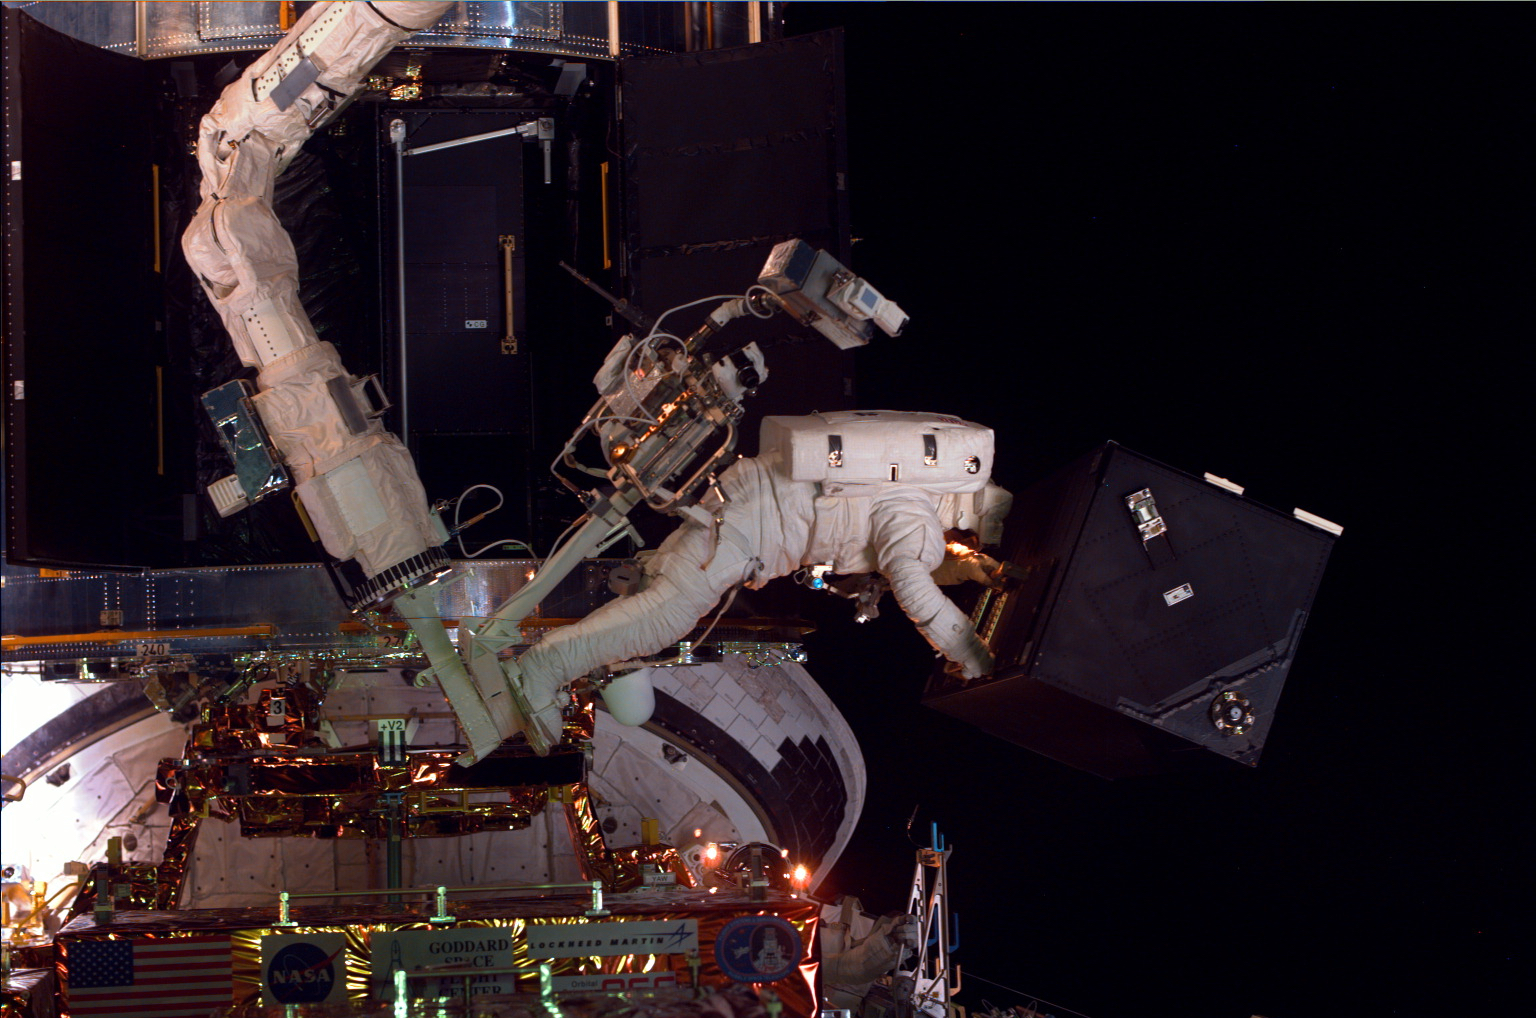 An astronaut on the end of the space shuttle's robotic CANADARM above the shuttle's cargo bay. He is holding Hubble's Faint Object Spectrograph, which looks like a black Hubble is in the background.